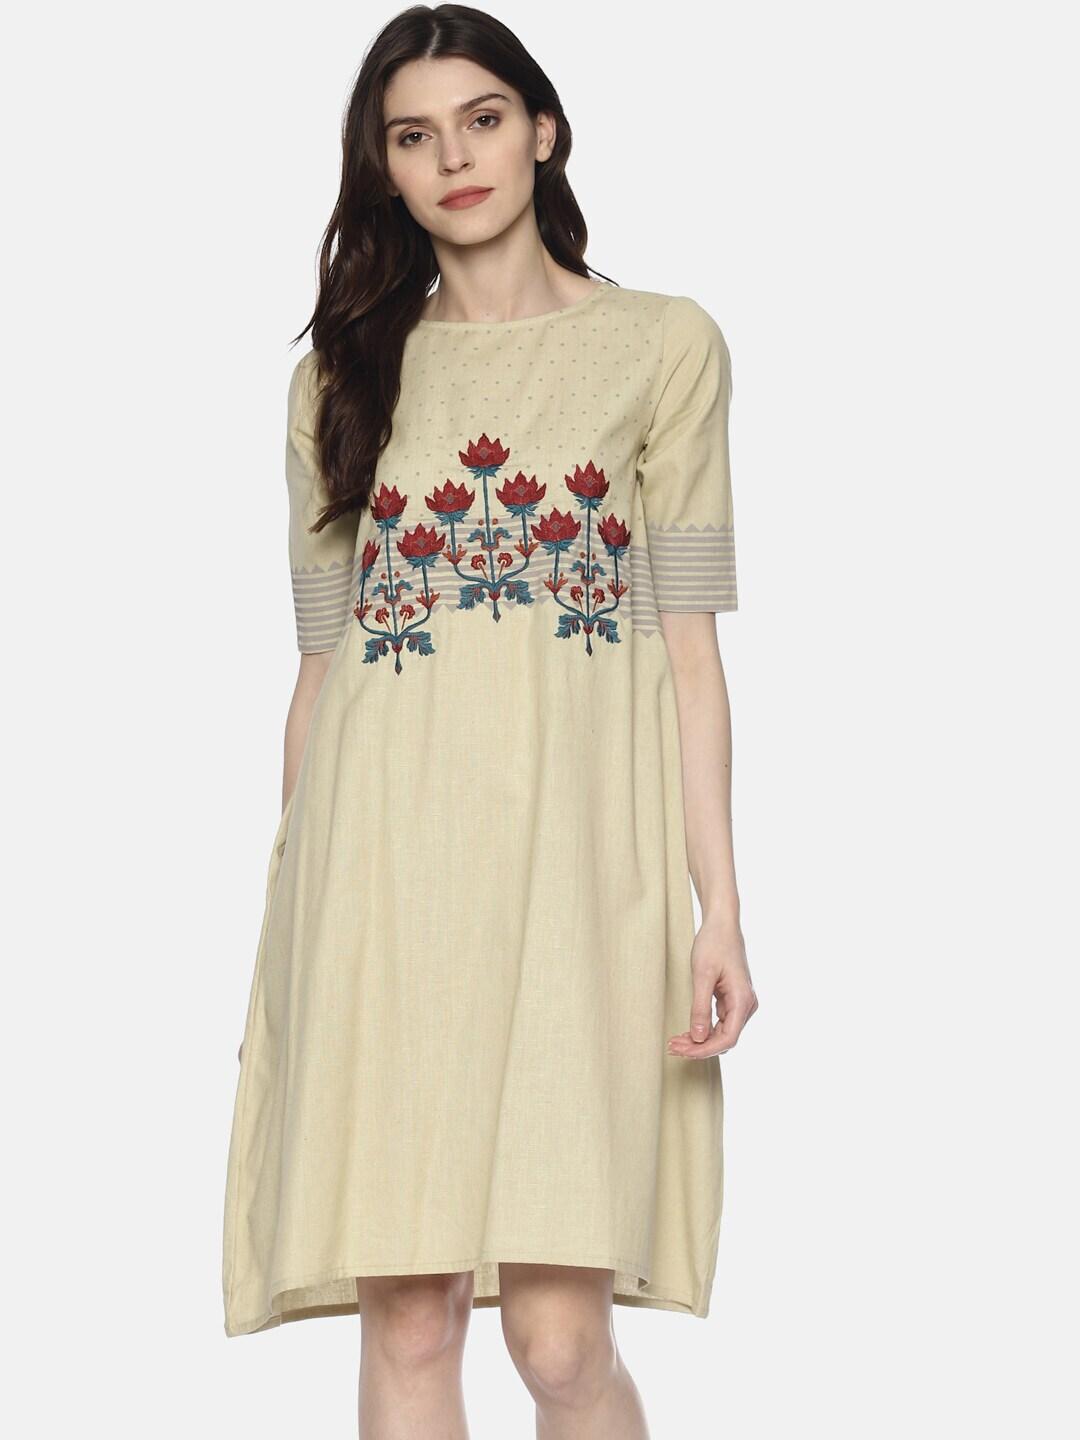 UNTUNG Cream-Coloured Floral Embroidered A-Line Dress